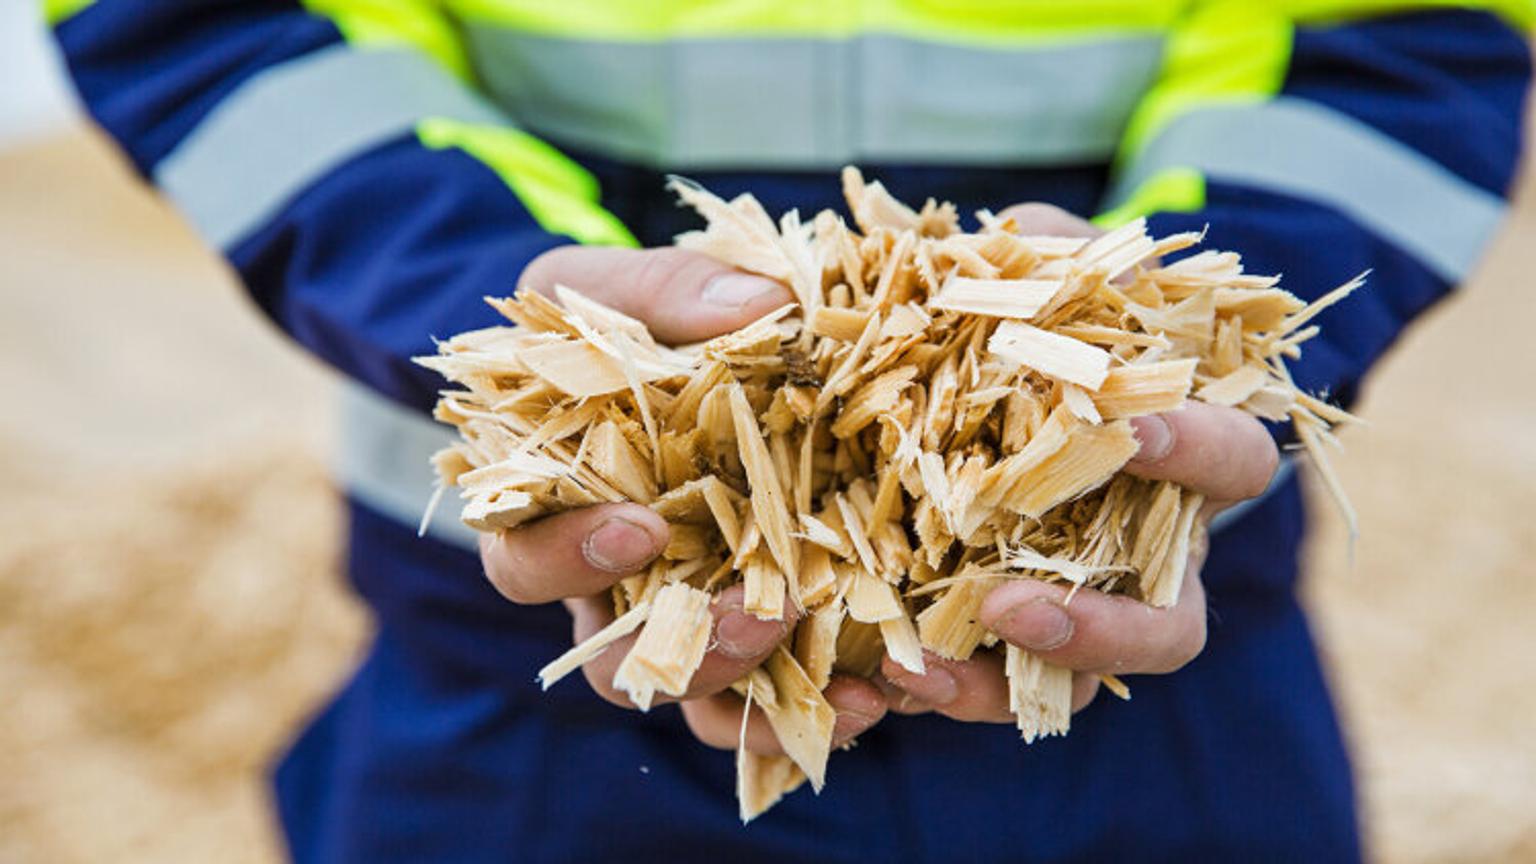 Man holding wood chips